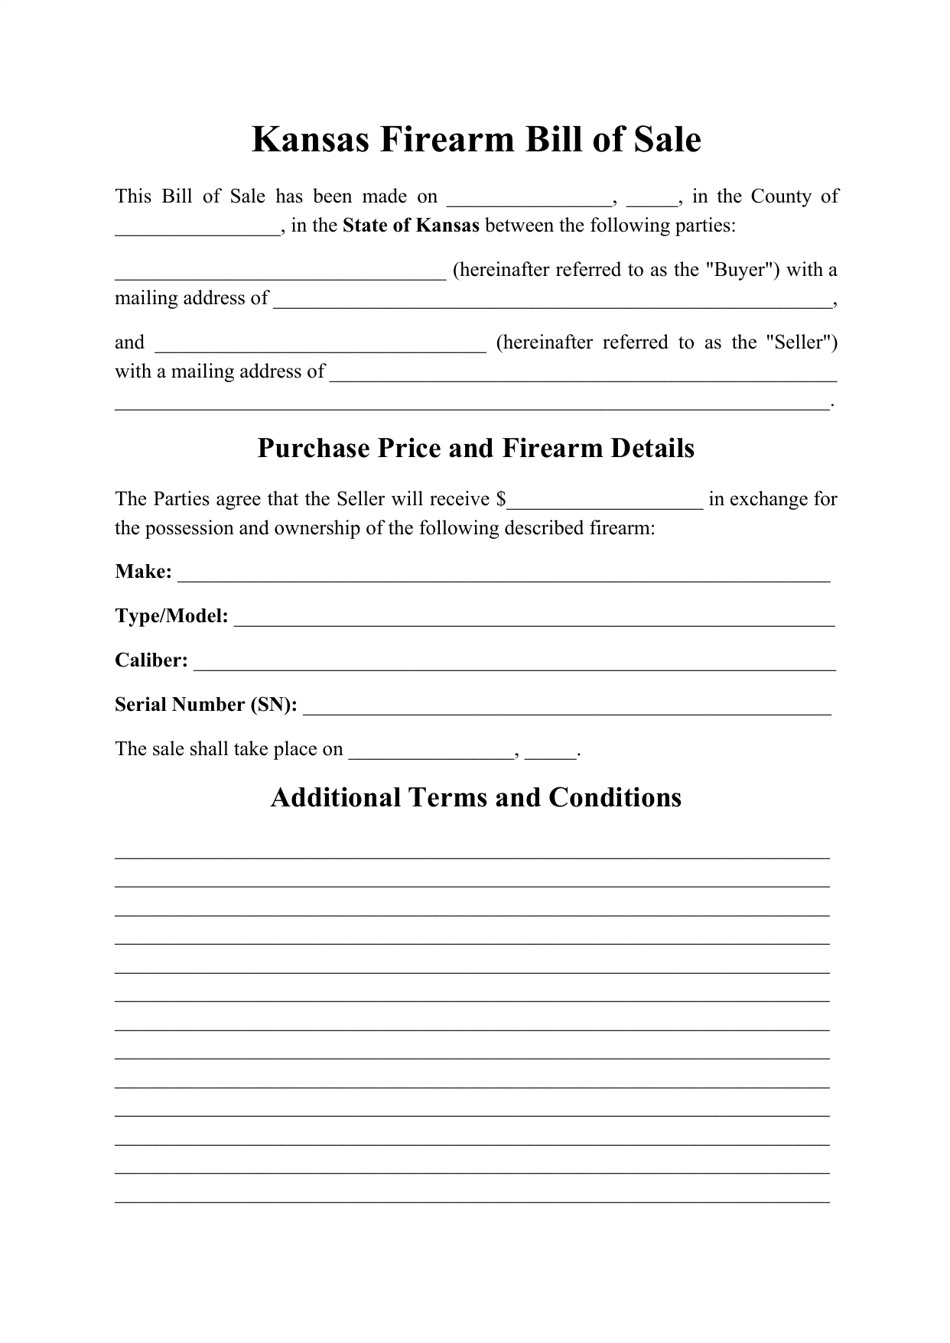 Kansas Firearm Bill of Sale Form Fill Out, Sign Online and Download